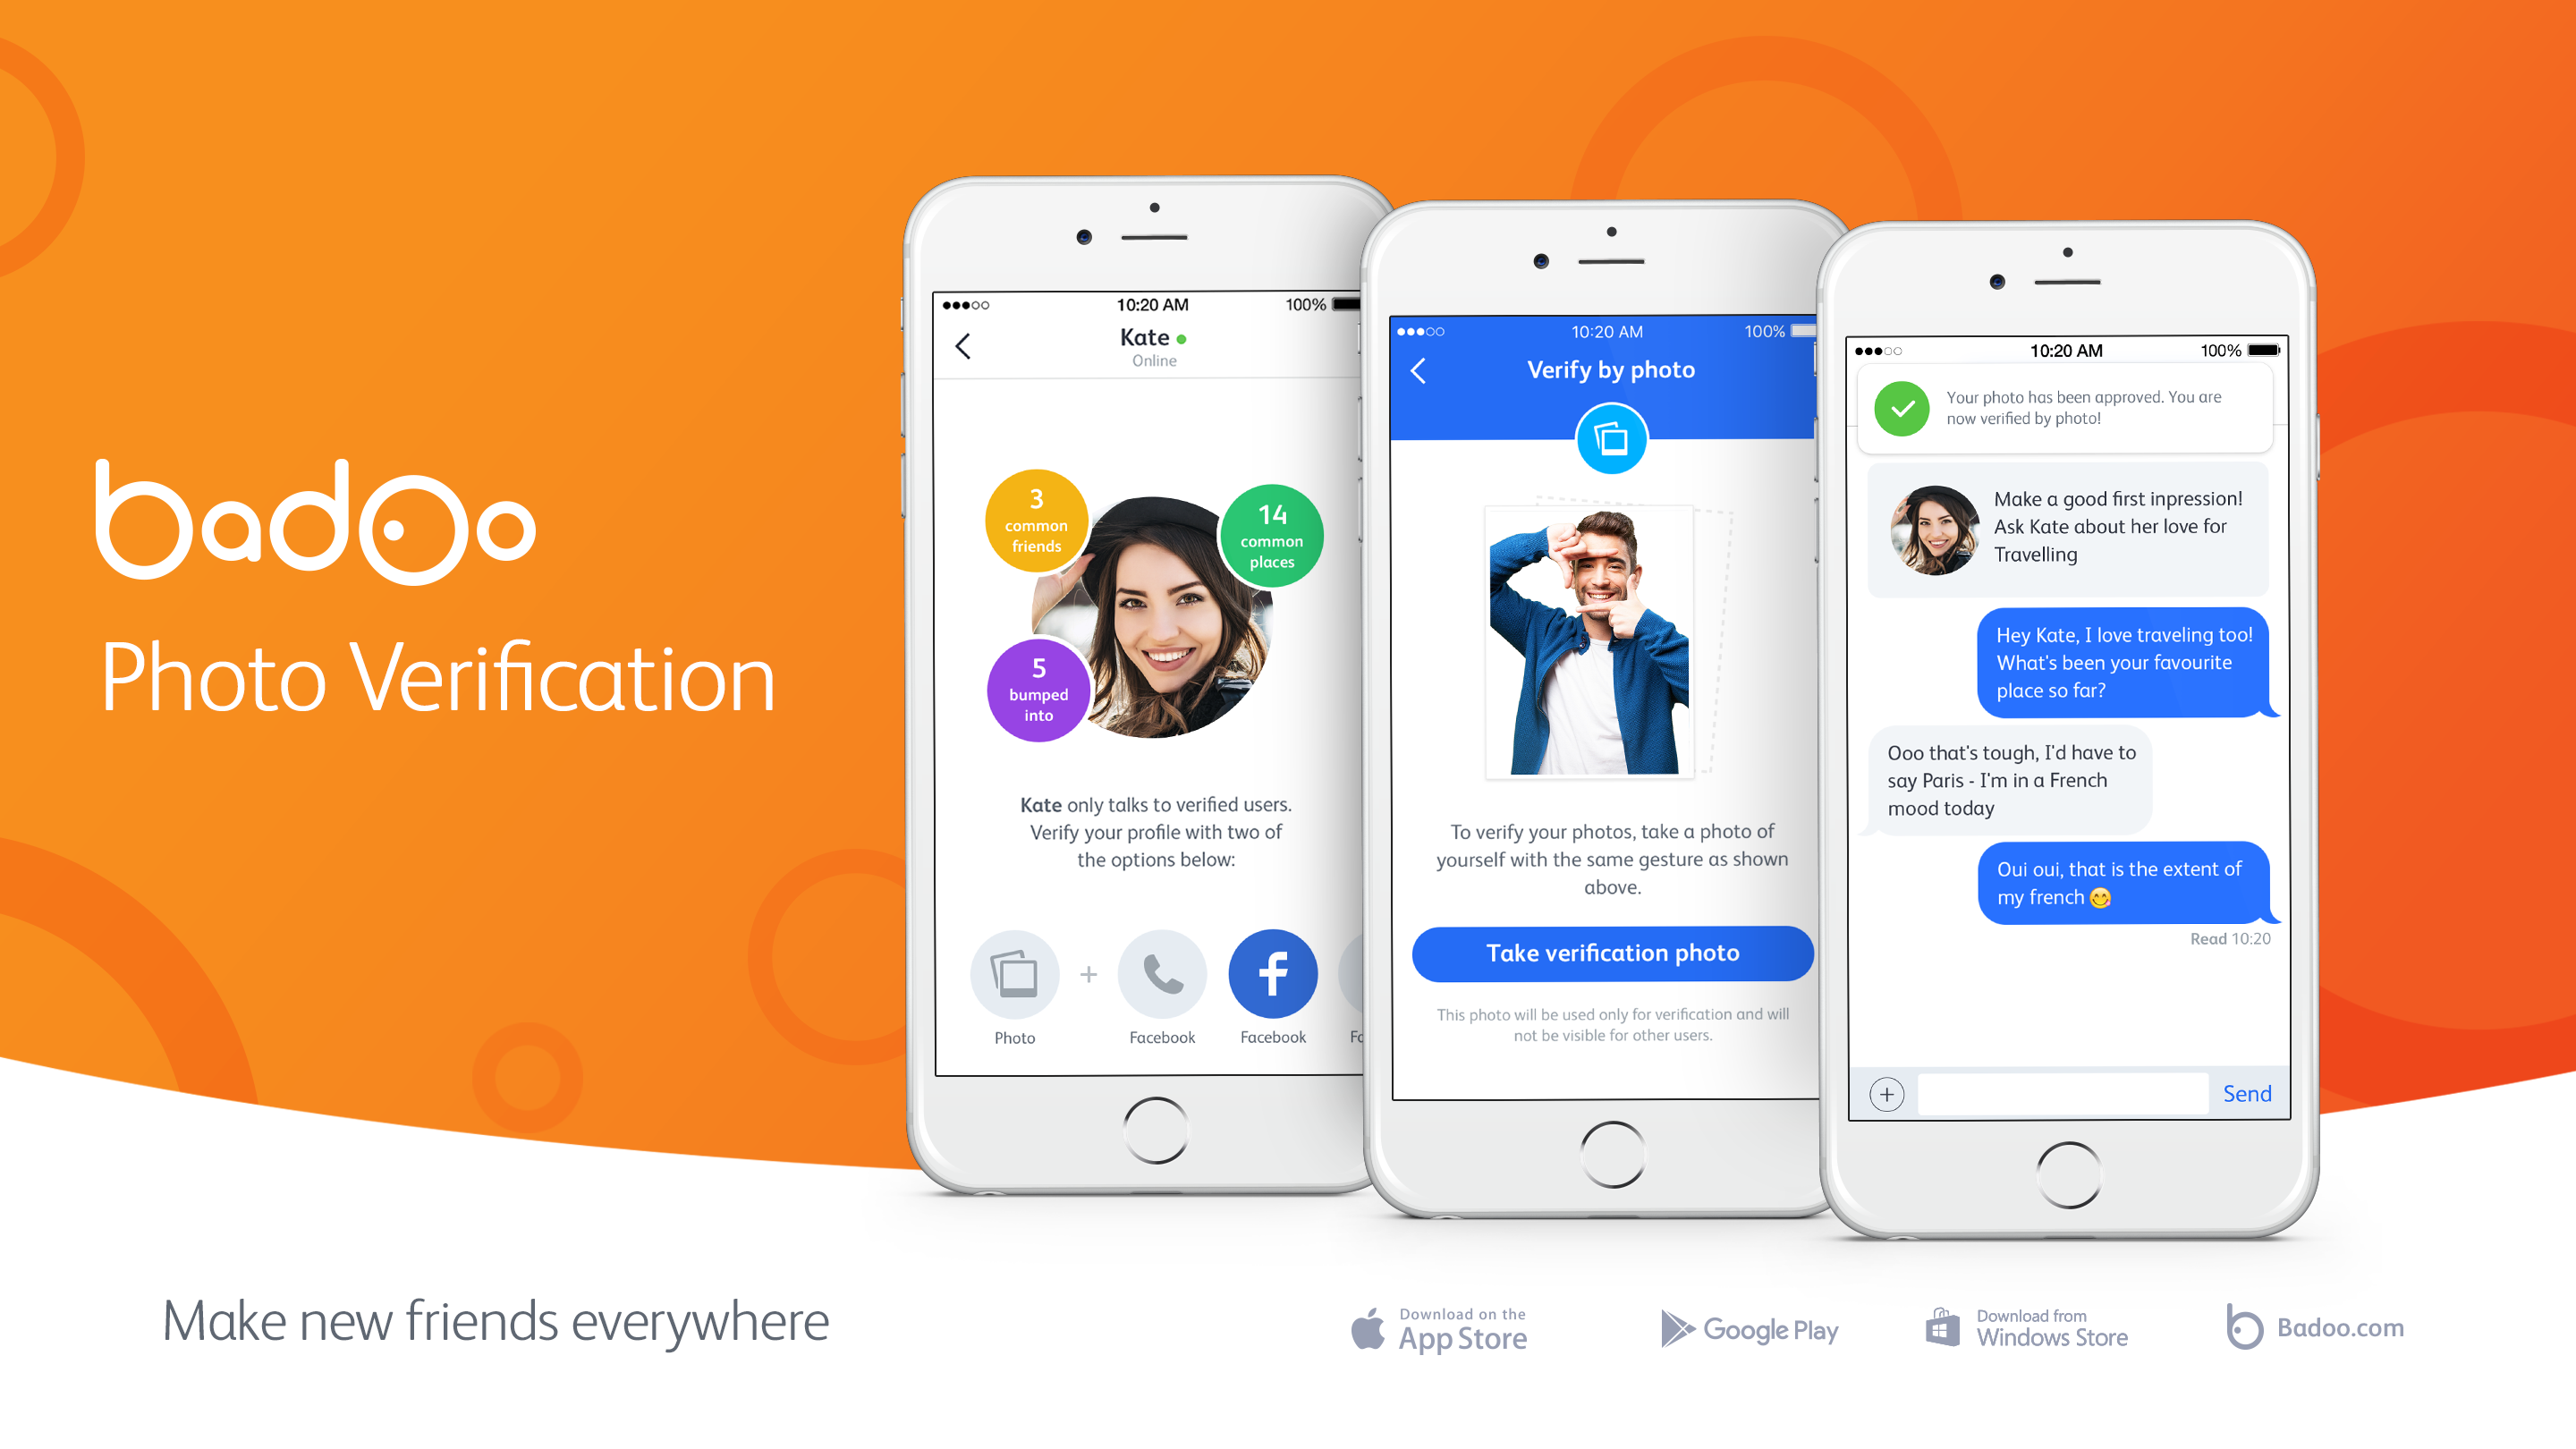 Badoo launches photo verification for safer, more efficient online dating.